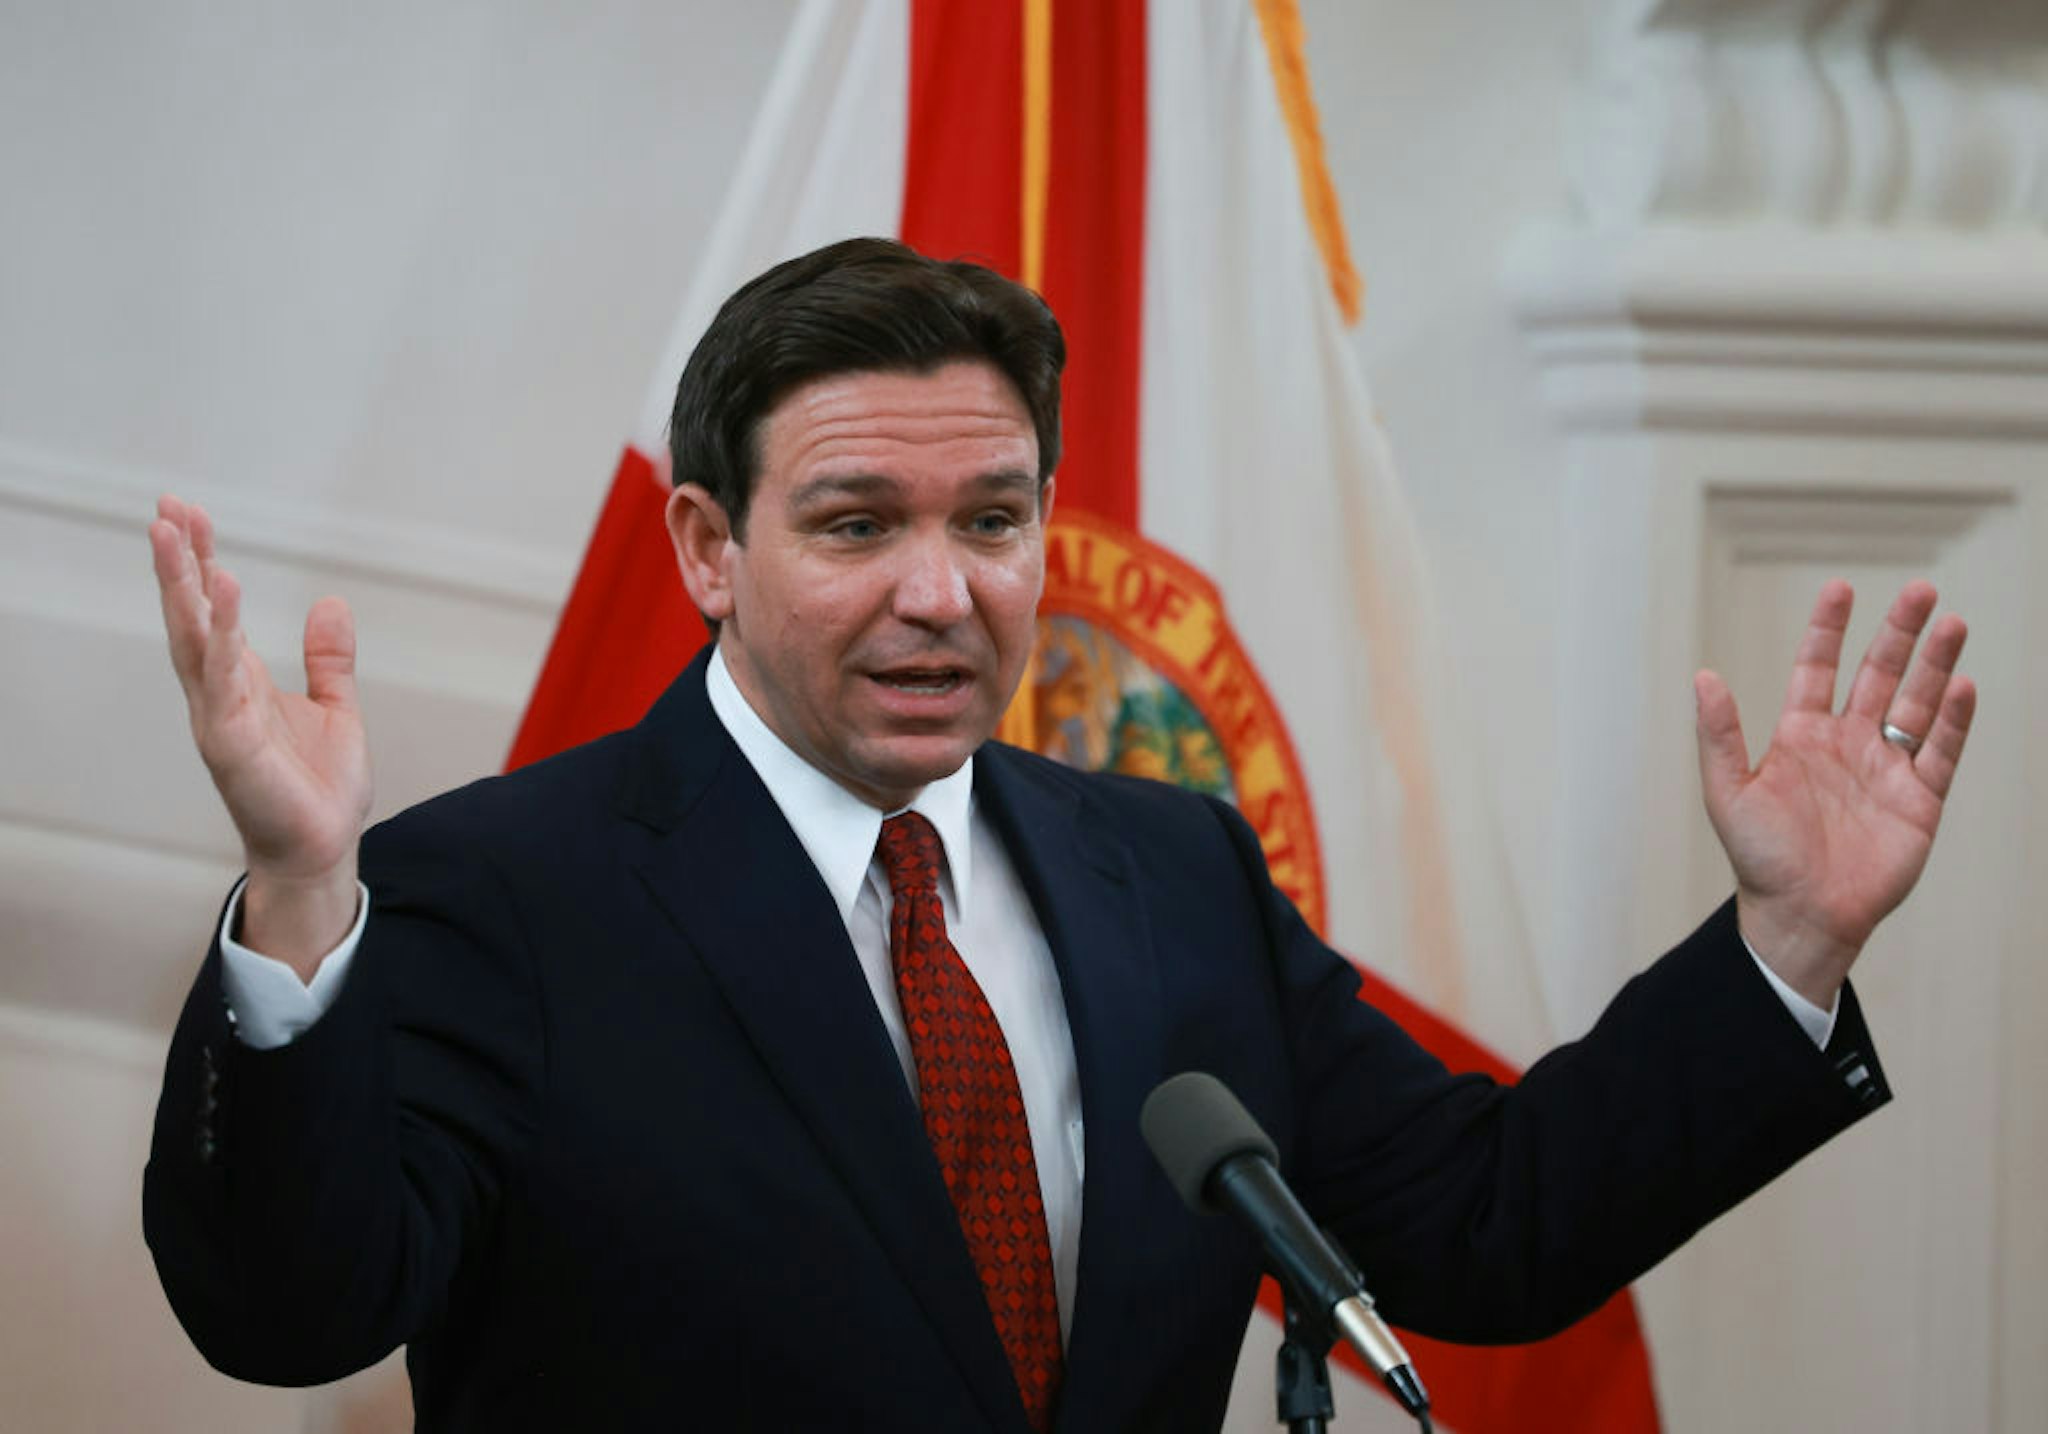 MIAMI BEACH, FLORIDA - FEBRUARY 05: Florida Gov. Ron DeSantis speaks during a news conference on February 05, 2024 in Miami Beach, Florida. Among other topics, he addressed the upcoming influx of spring breakers and assured the public that law enforcement officials and resources were available to maintain order if needed. (Photo by Joe Raedle/Getty Images)